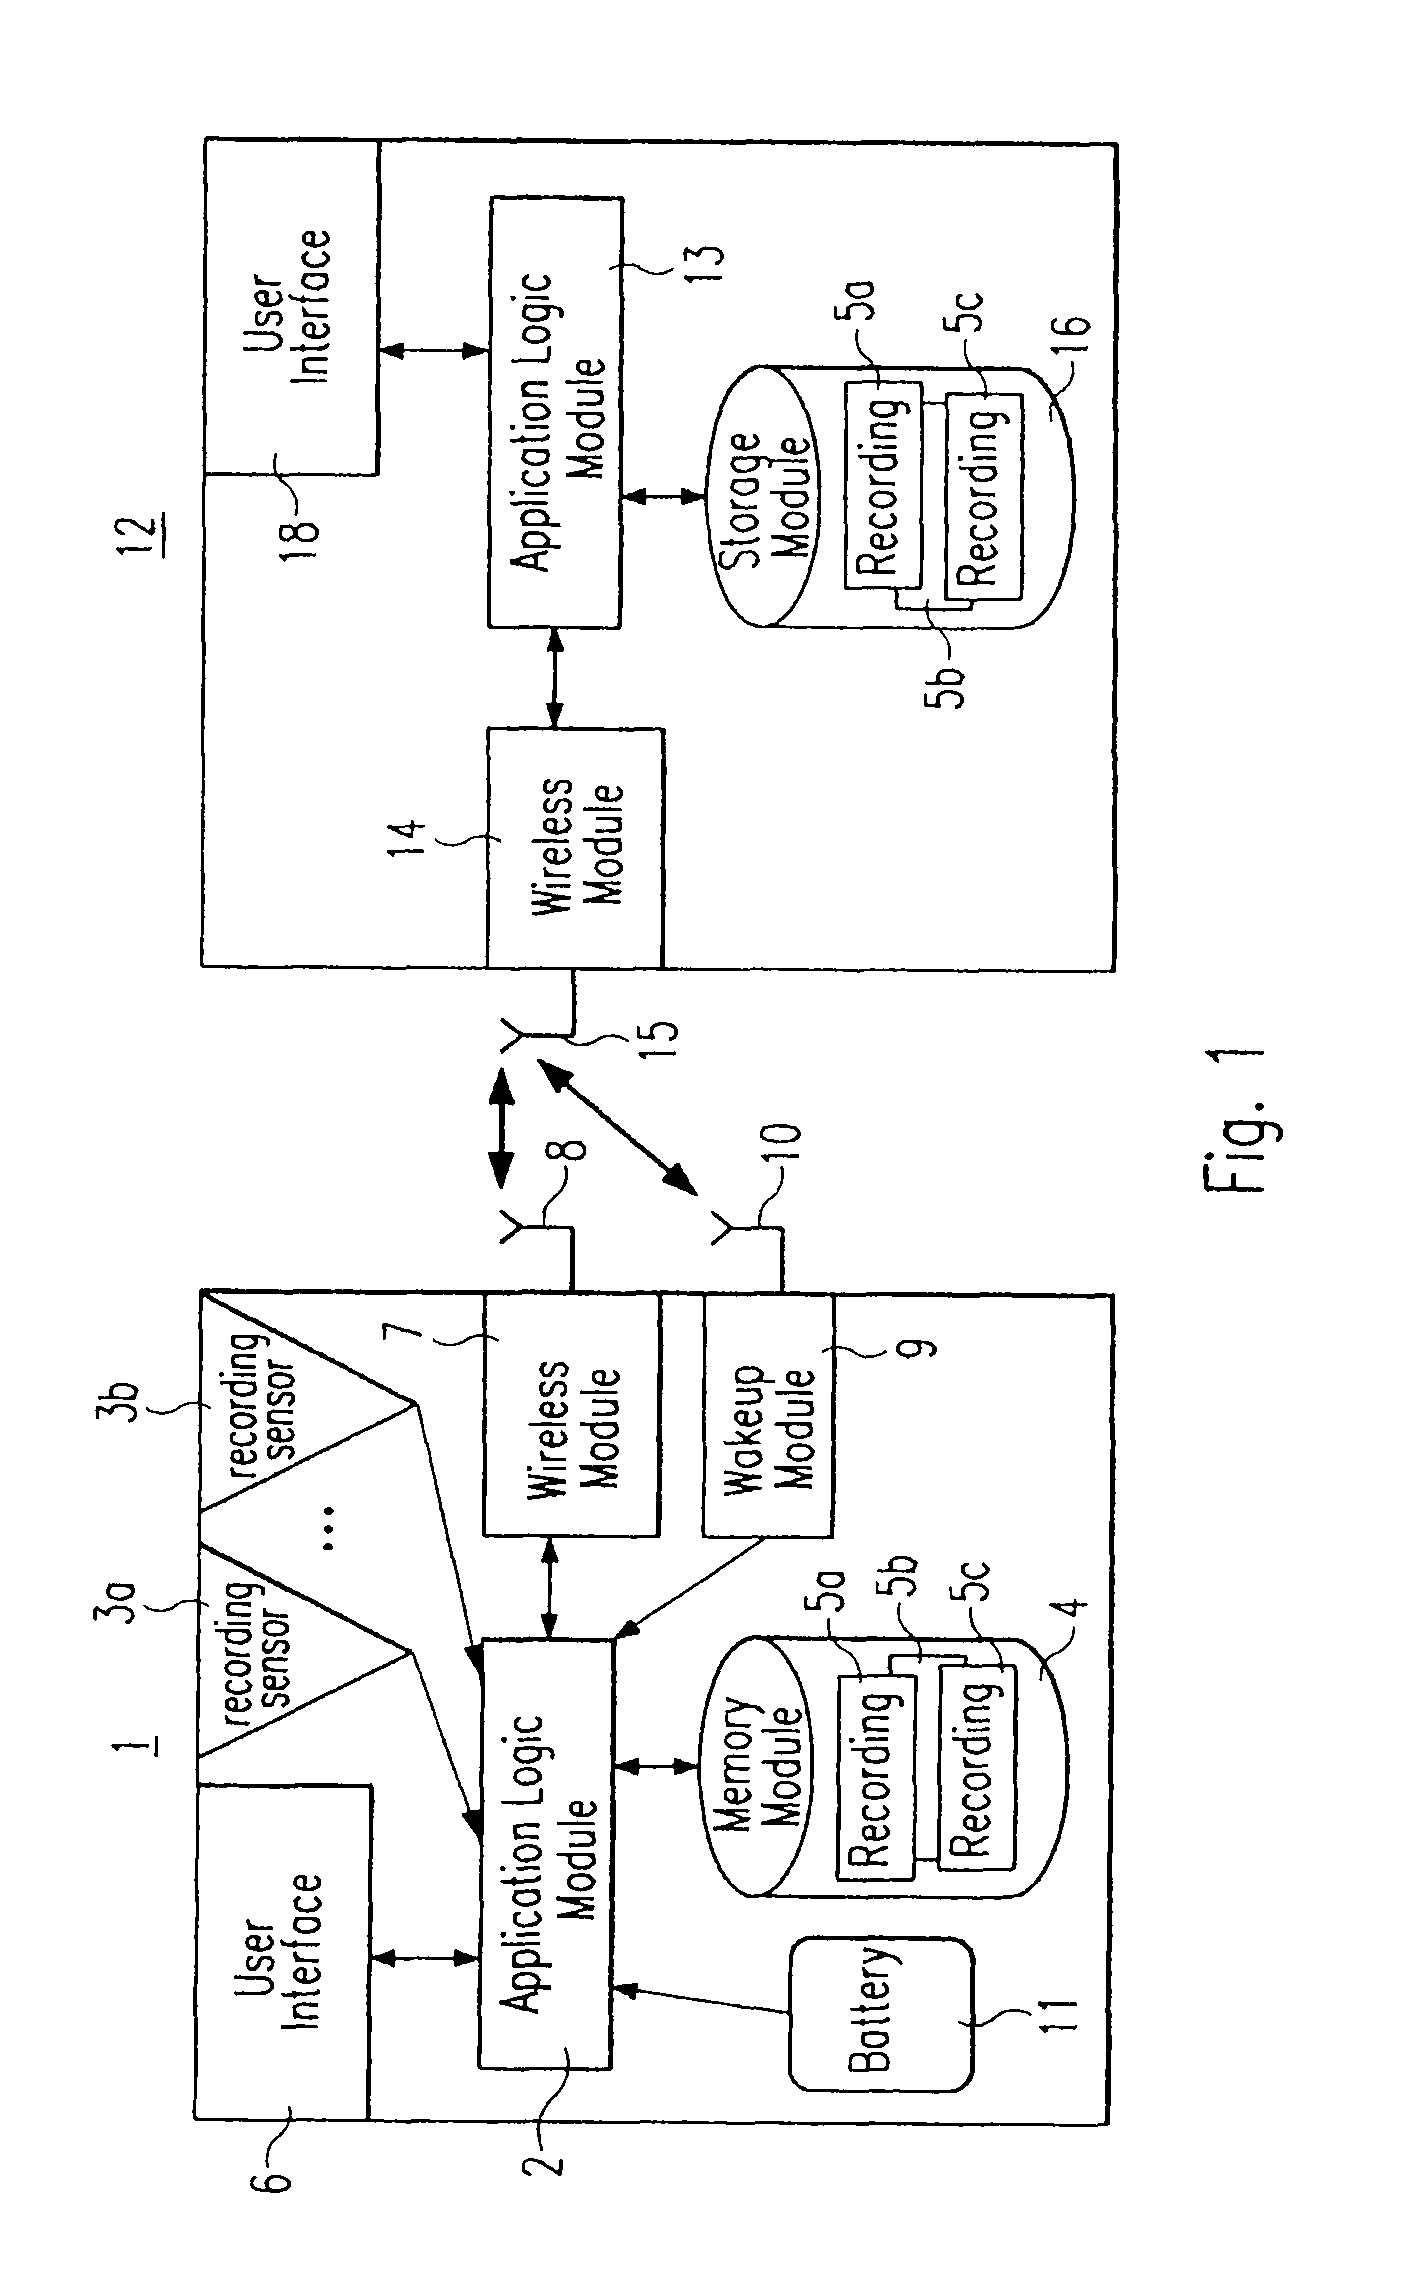 Wireless transfer of data from a mobile device to a server